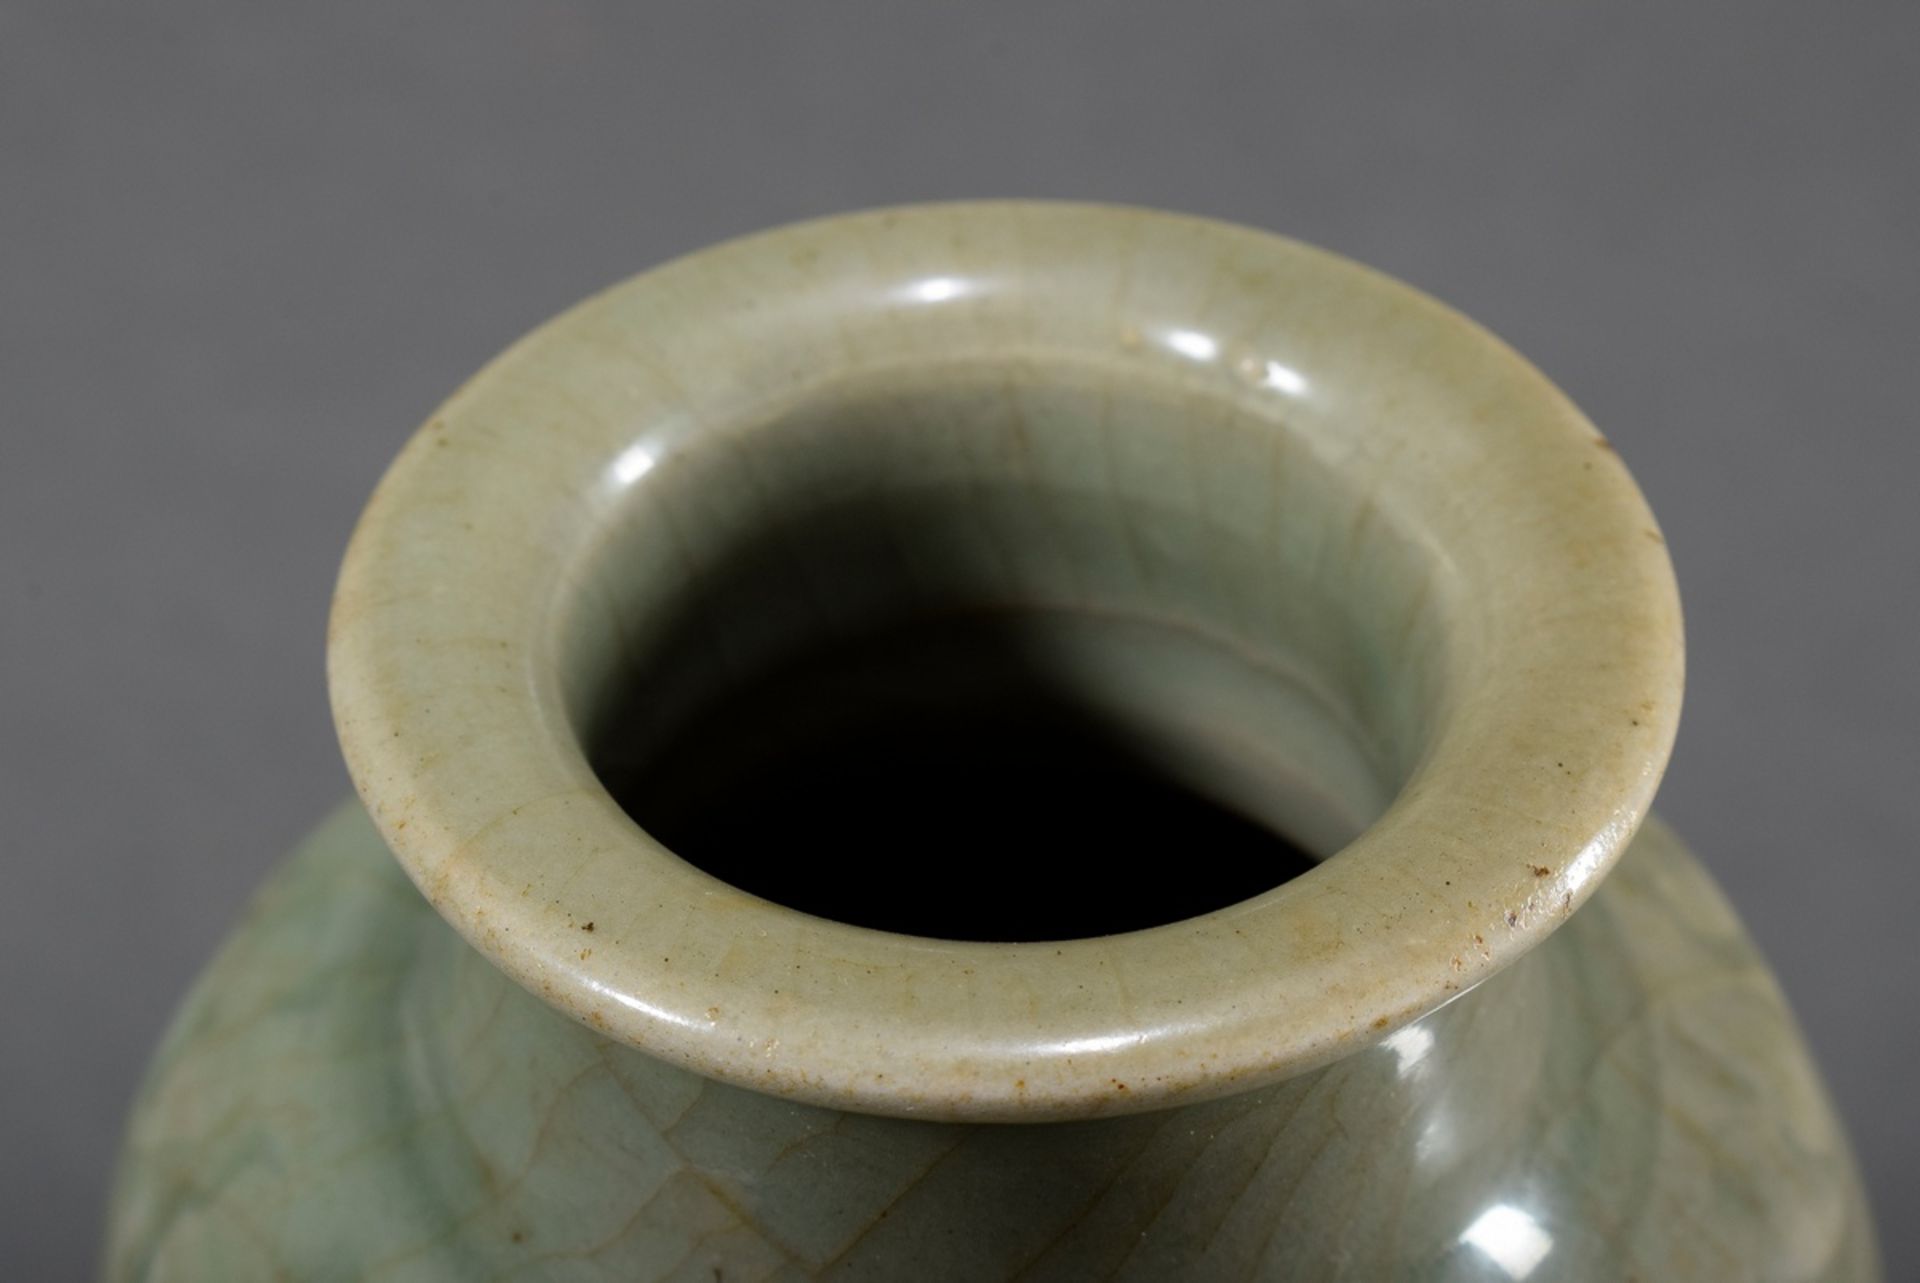 Small Longquan vase with incised decoration and celadon glaze and craquelée, Ming Dynasty, 16th cen - Image 3 of 4